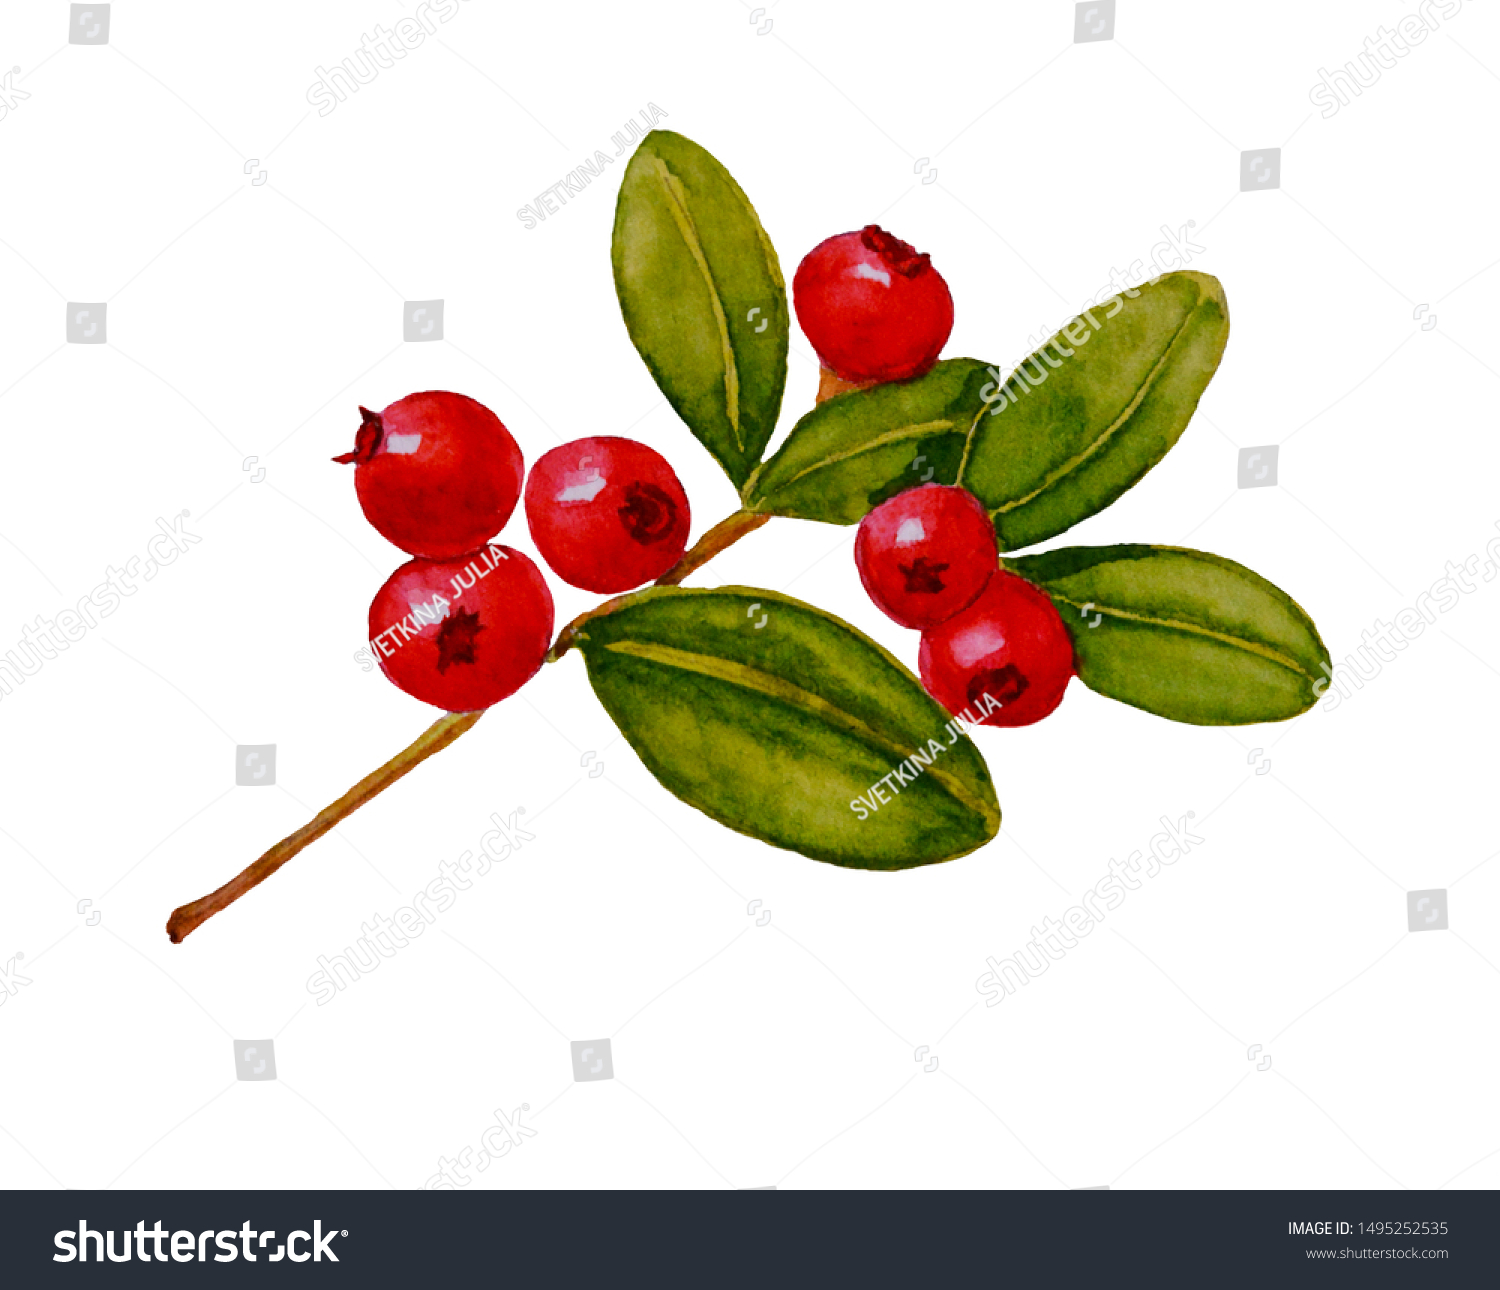 Watercolor painted illustration of lingonberry (cowberry) with leaves. Isolated. #1495252535